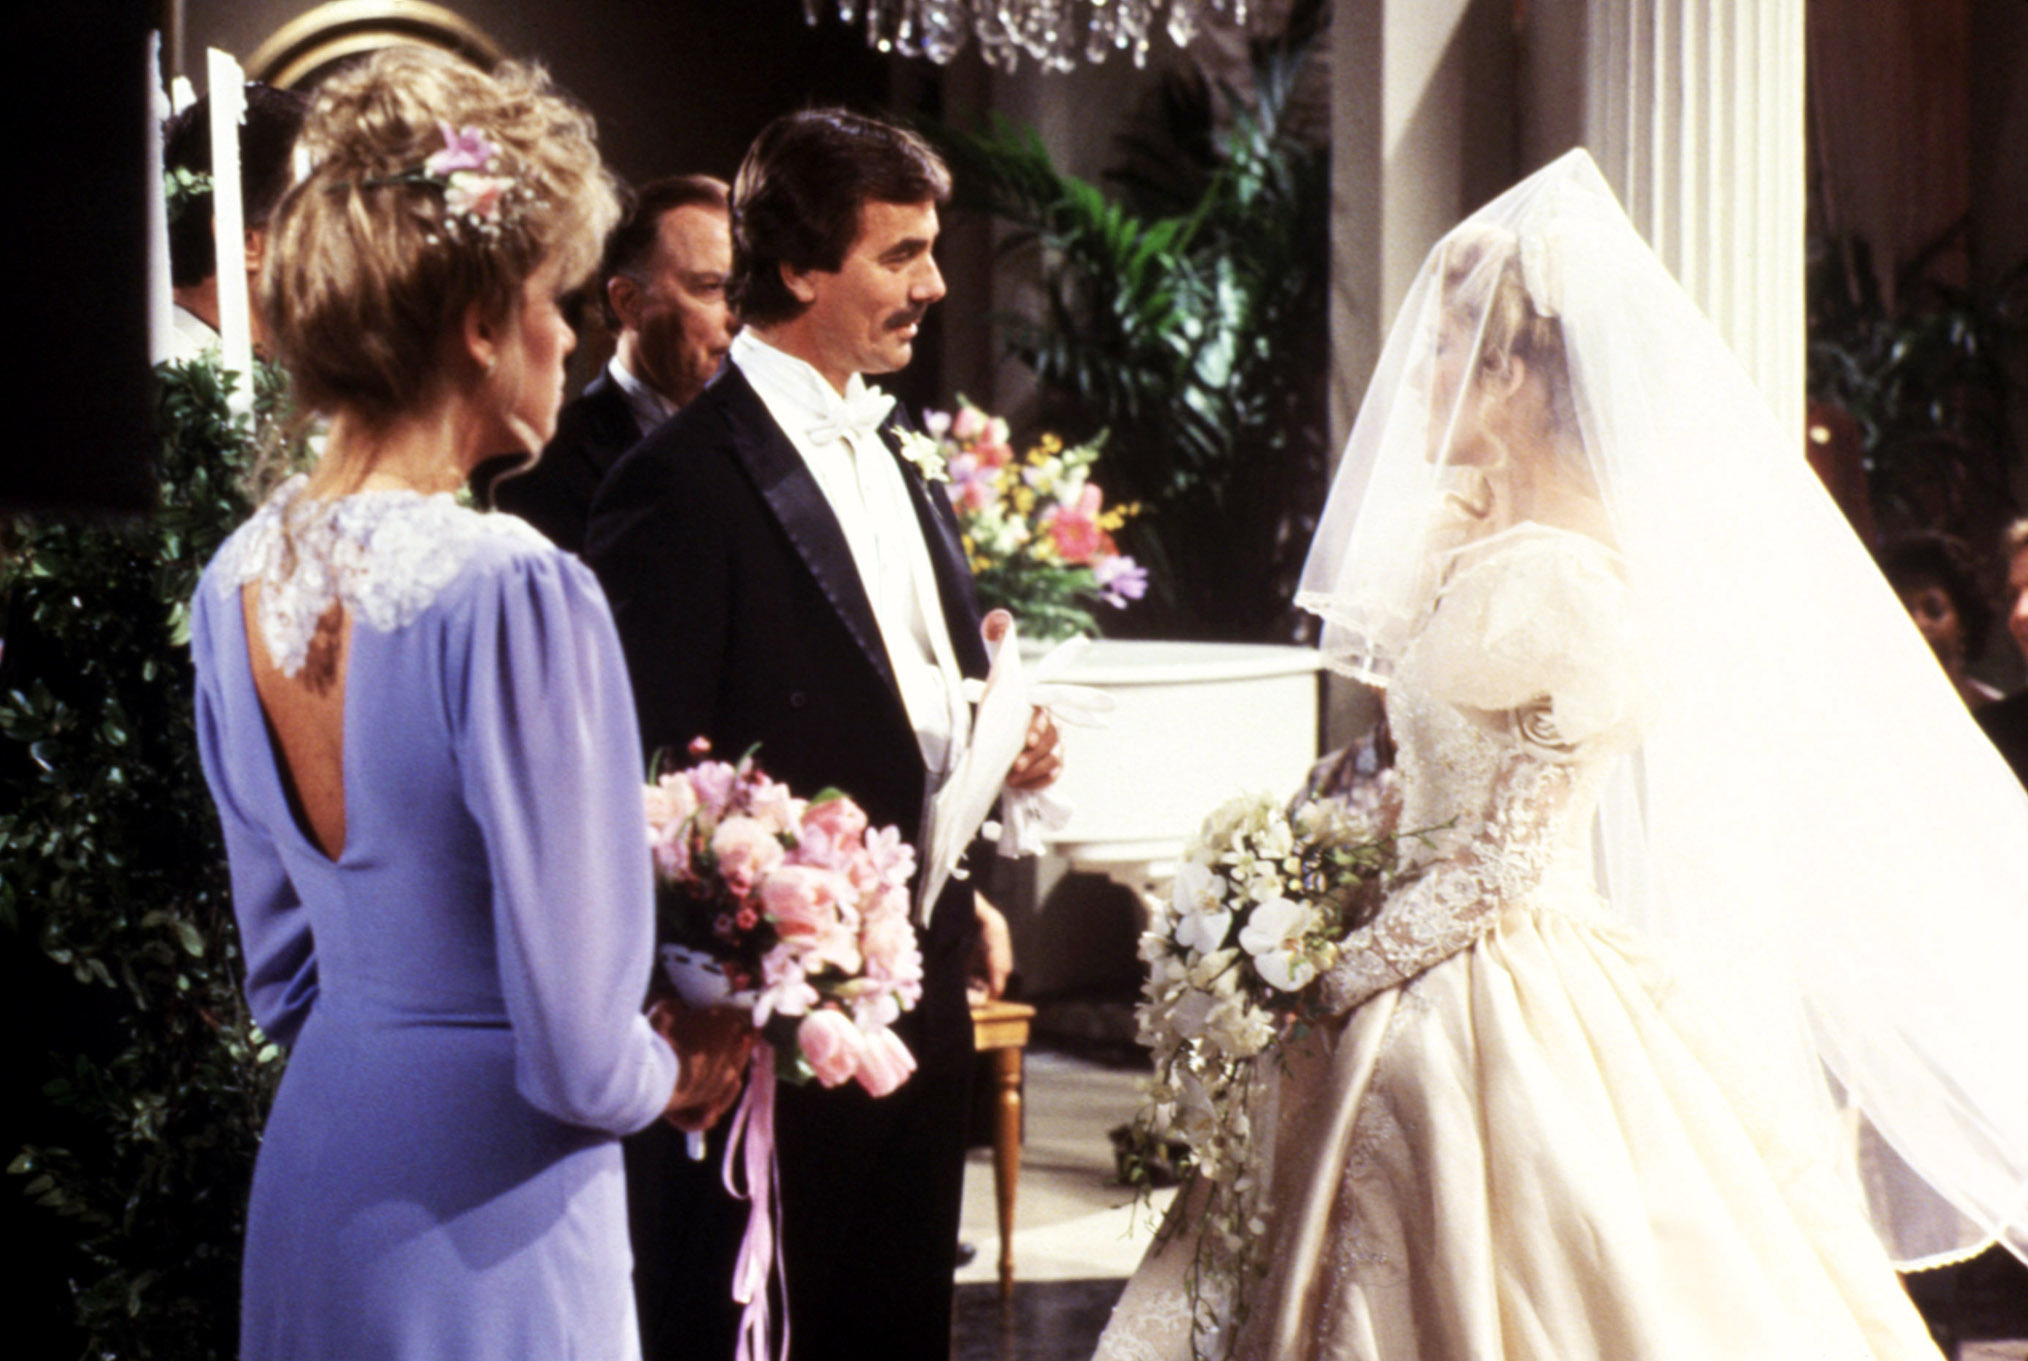 THE YOUNG AND THE RESTLESS, Eileen Davidson, Eric Braeden, Melody Thomas Scott